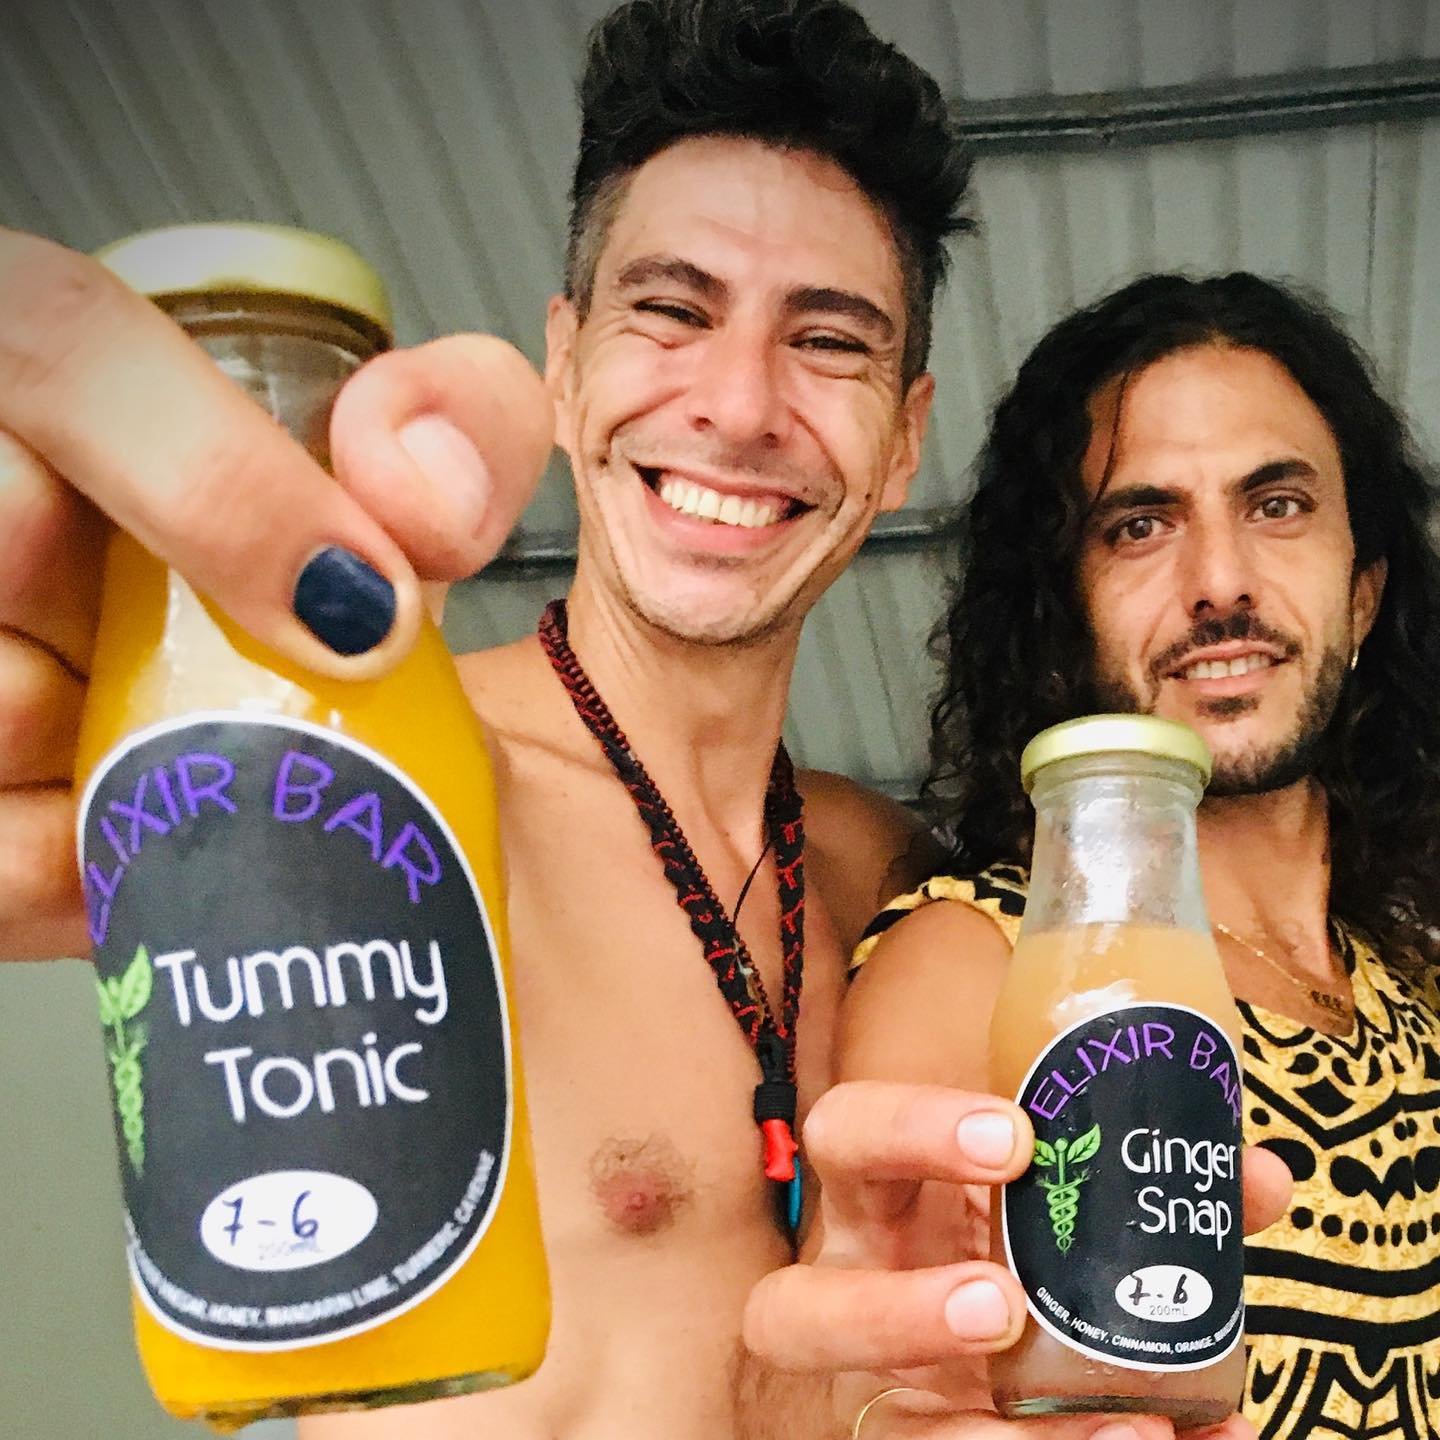 Available in our grab n go refrigerator. Cool, refreshing and healthy 💚💜 #grabngo #tonic #elixir #kava #ginger